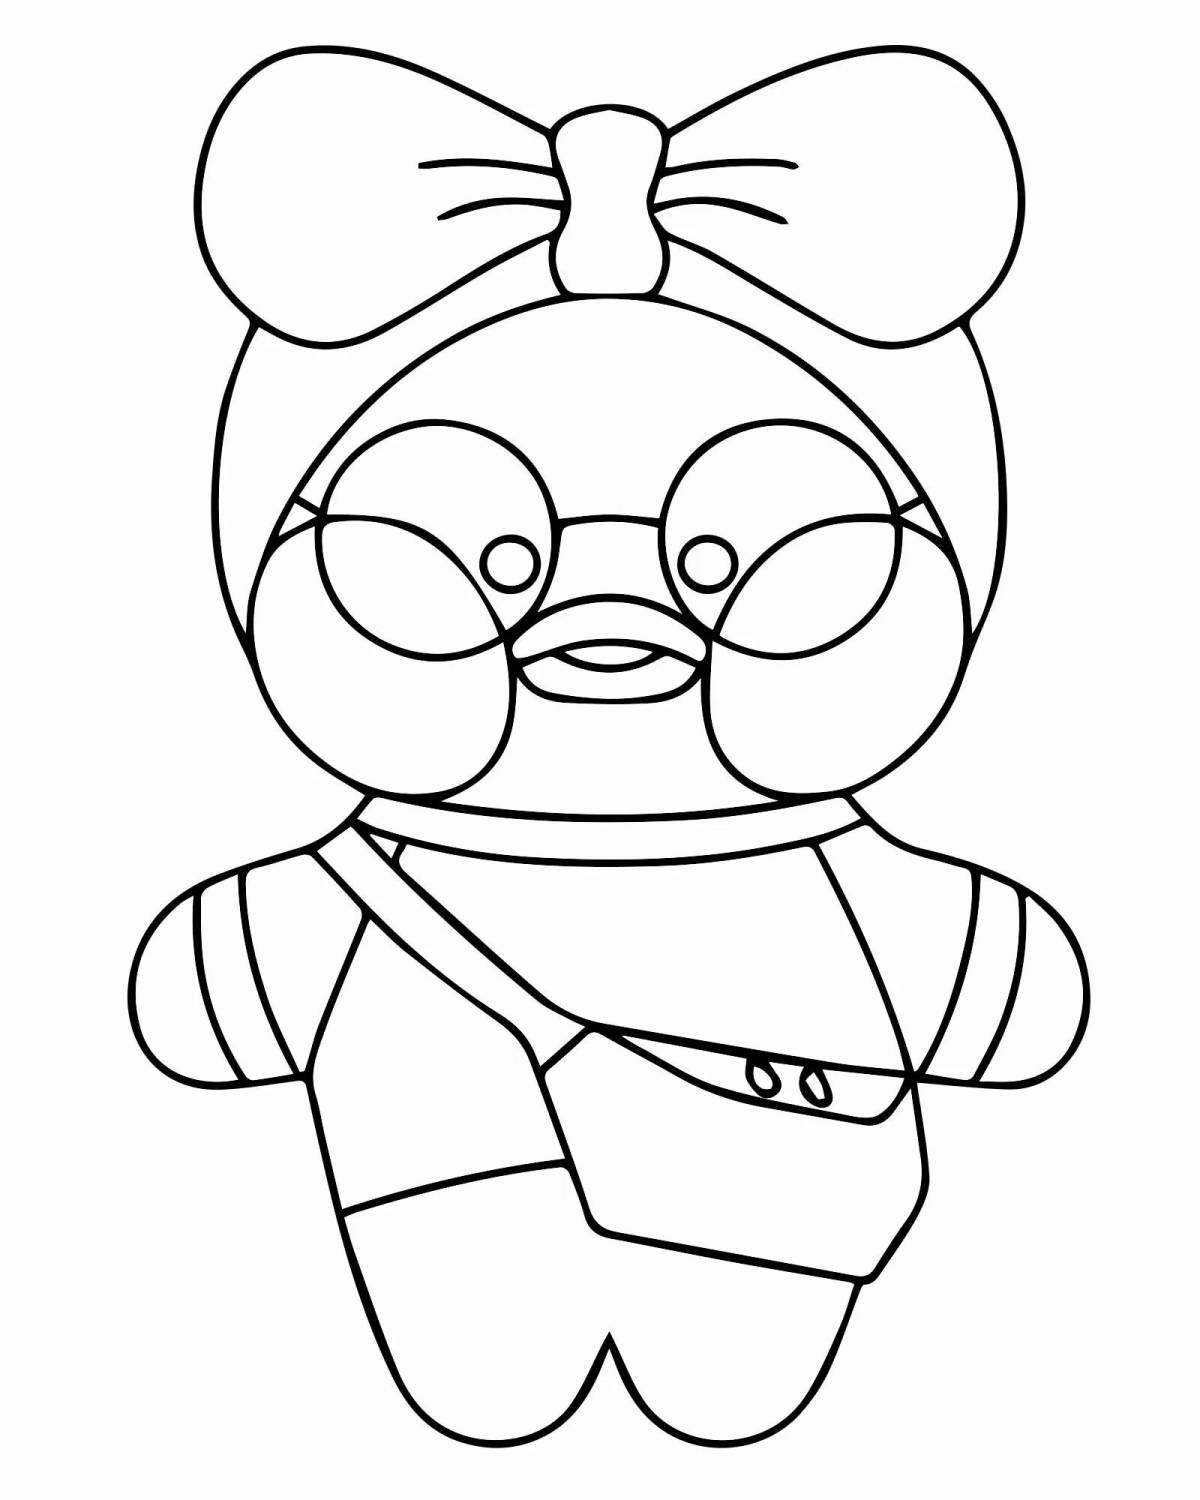 Coloring page delightful lafanfan duck